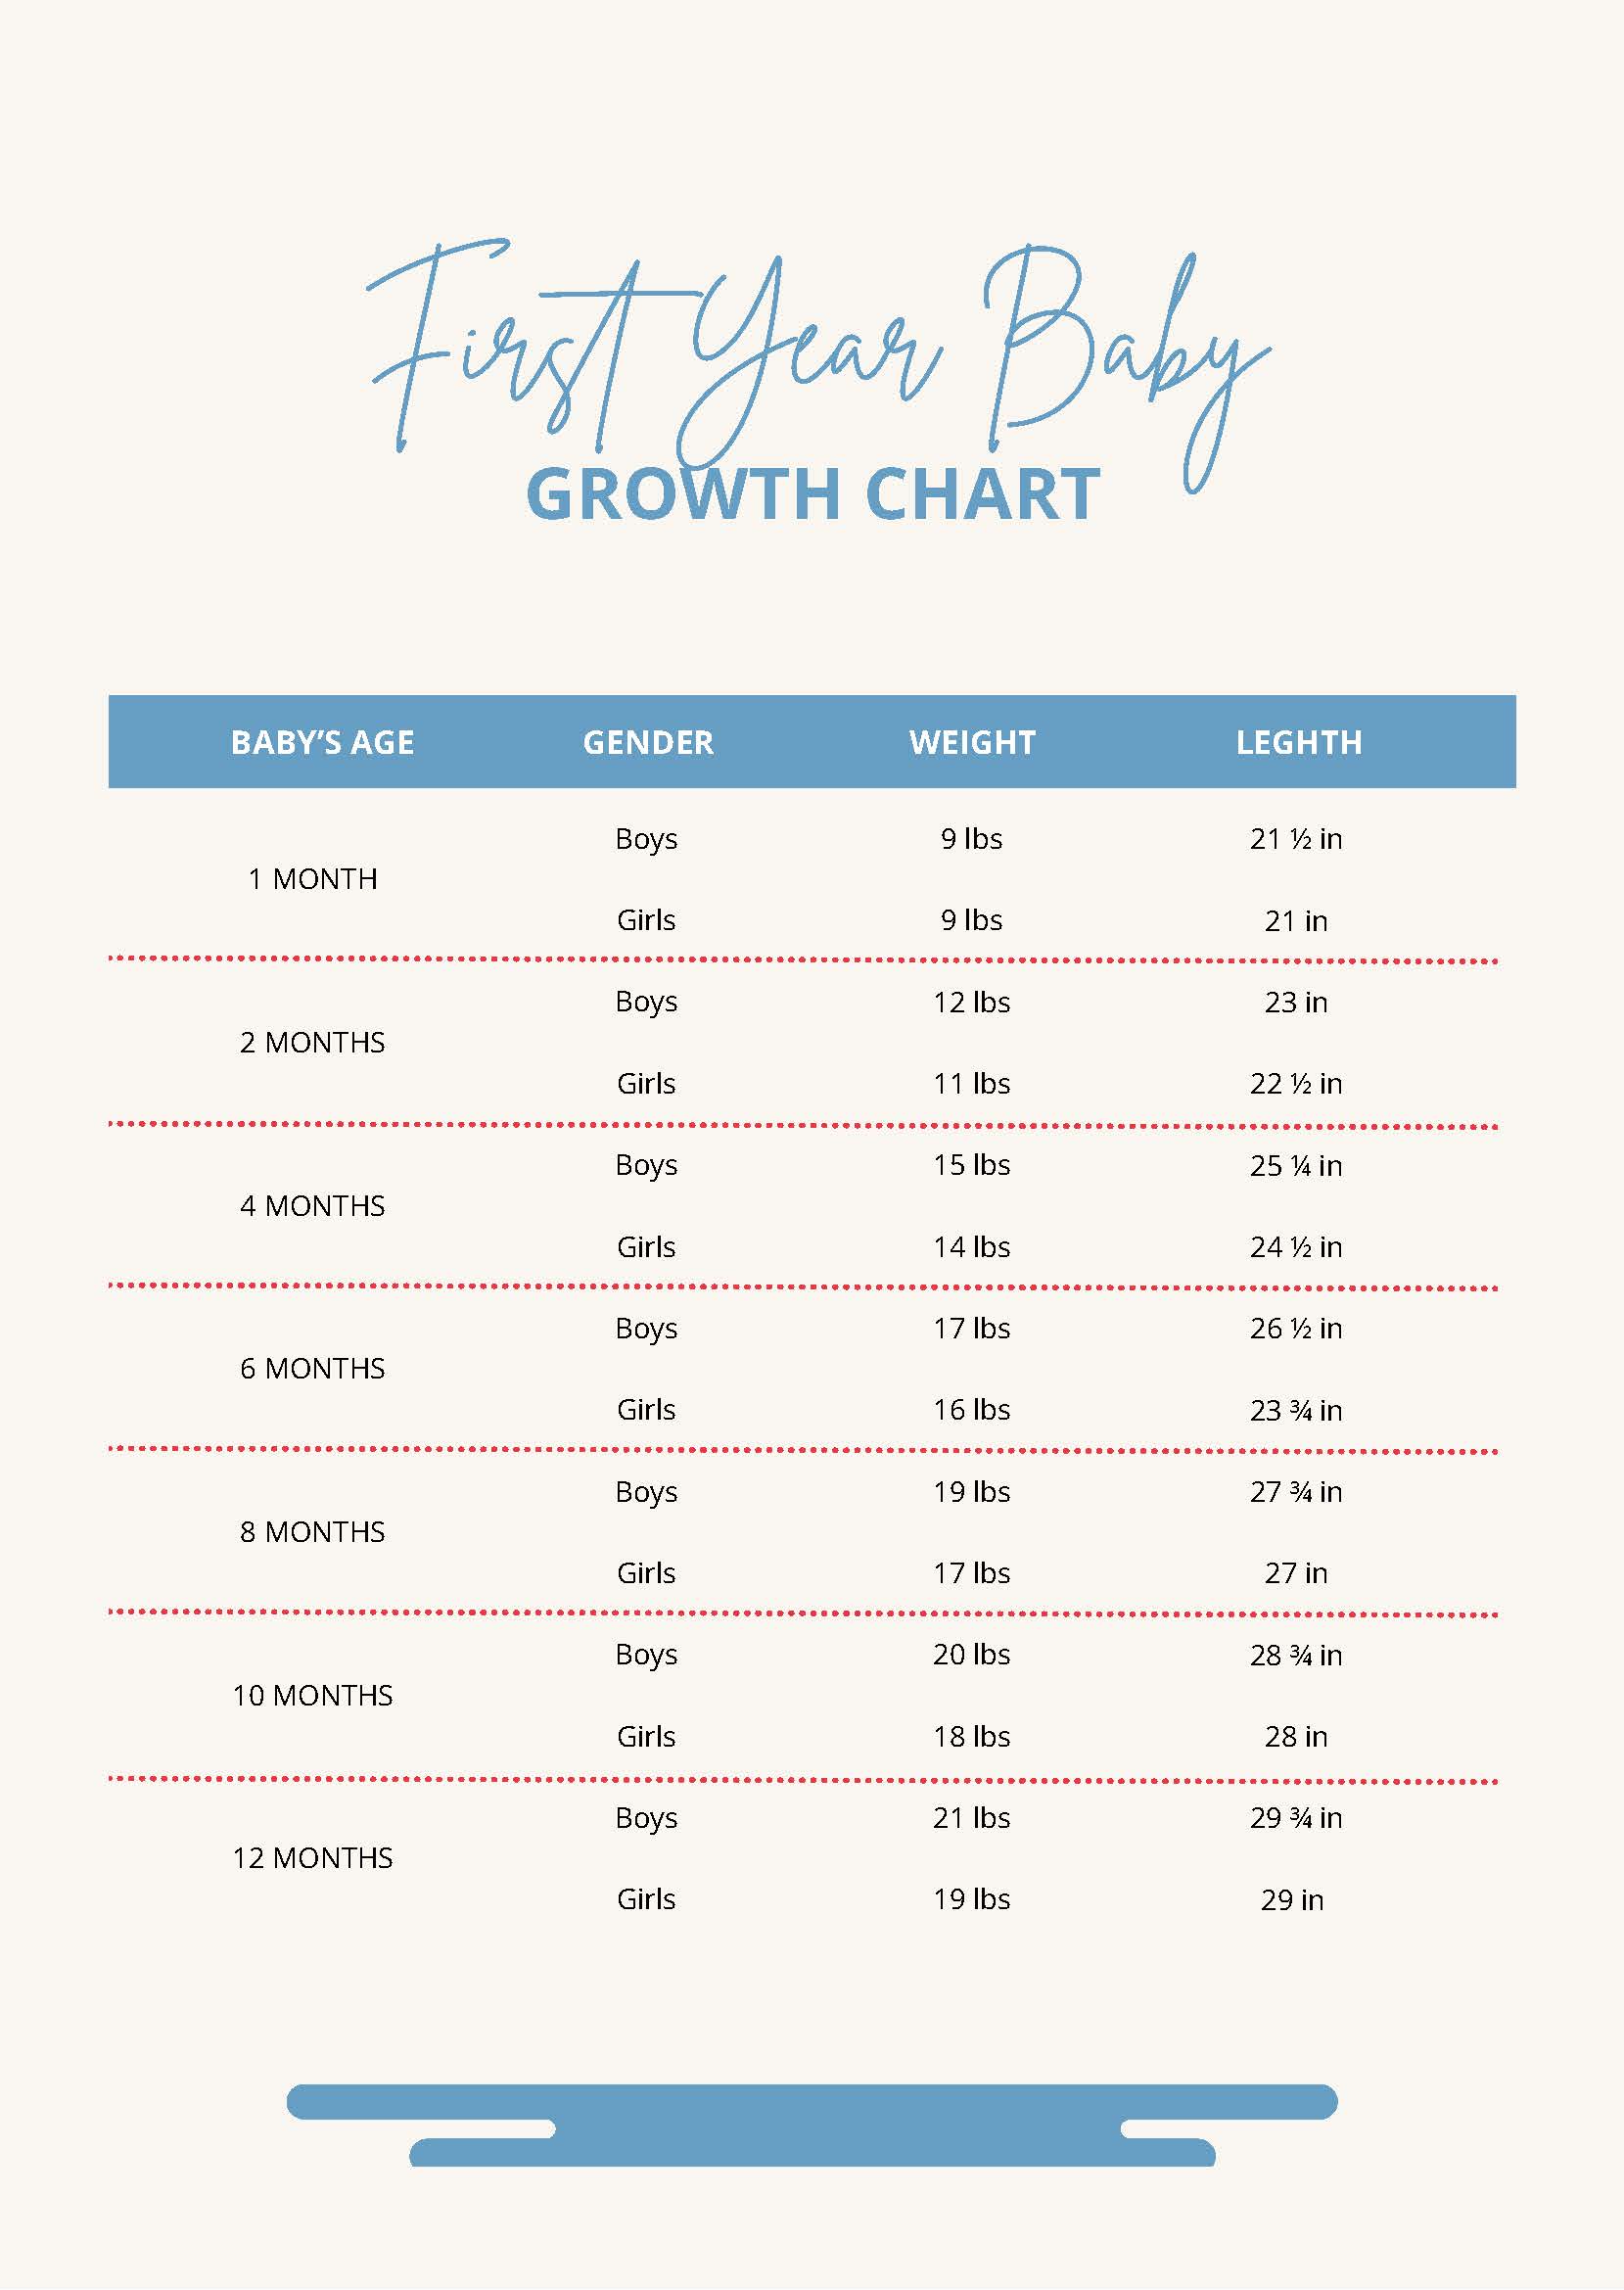 First Year Baby Growth Chart